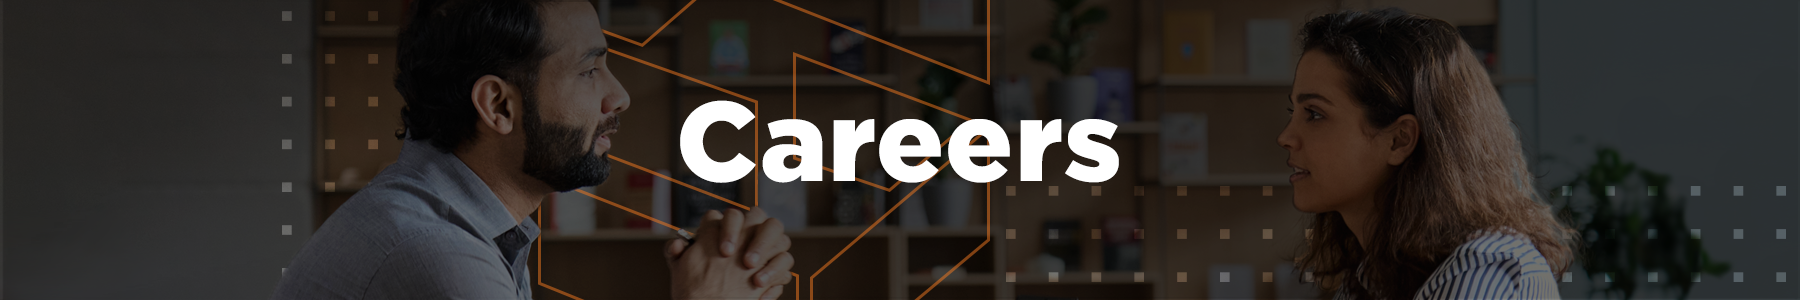 careers-banner-1800x300